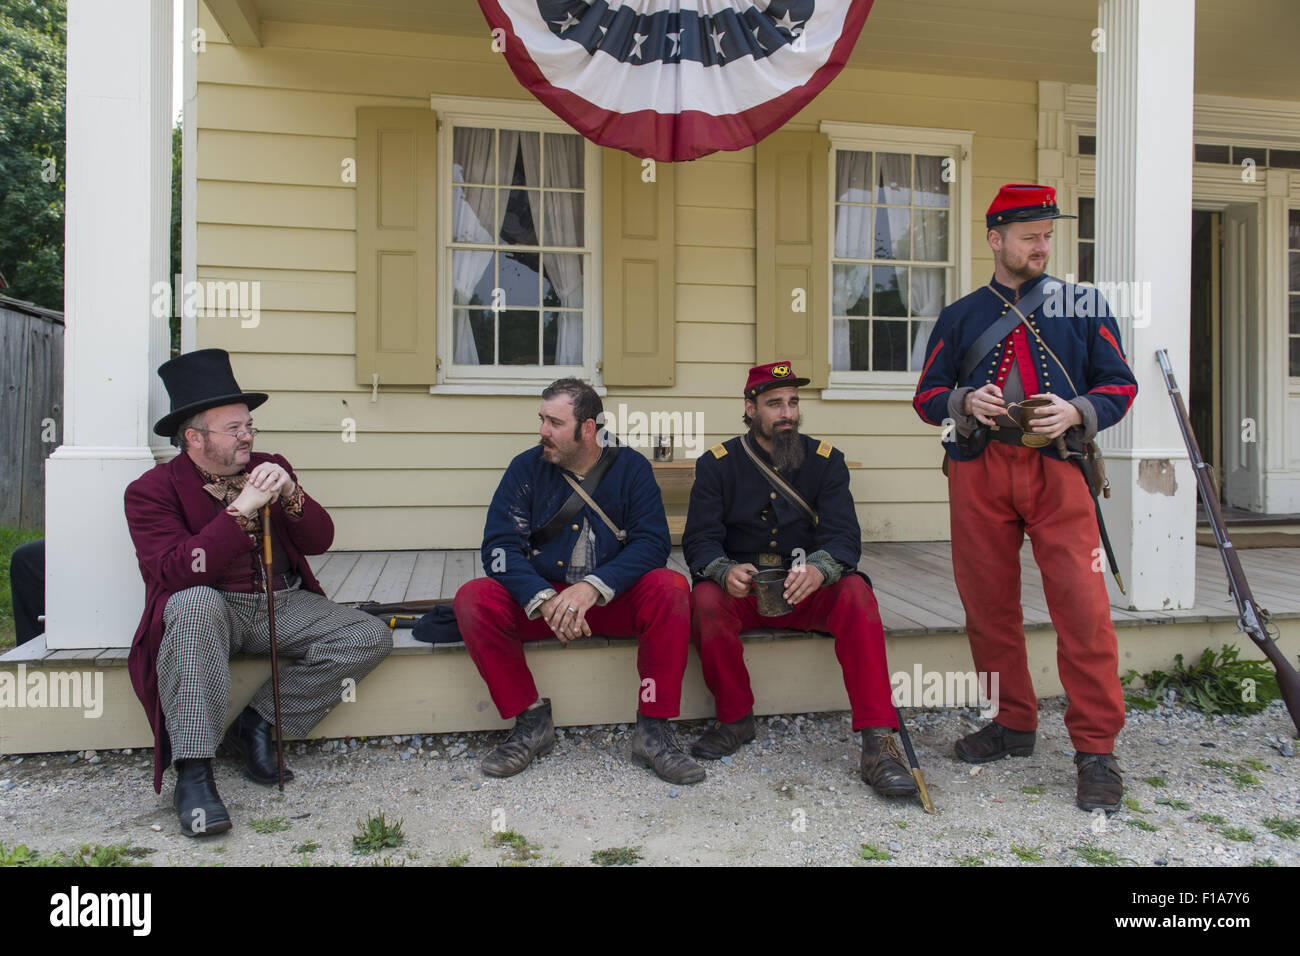 Old Bethpage, New York, USA. 30th Aug, 2015. L-R in soldier uniforms, Sean Sullivan from Greenlawn, Andrew Preble from Long Beach, and Matt Dellinger from Brooklyn, portray American Civil War soldiers from the 14th Brooklyn Regiment (14th New York State Militia) AKA The Brooklyn Chasseurs, at the Noon Inn tavern during the Old Time Music Weekend at the Old Bethpage Village Restoration. During their historical reenactments, members of the non-profit 14th Brooklyn Company E wear accurate reproductions of ''The ''Red Legged Devils'' original Union army uniform. (Credit Image: © Ann Par Stock Photo